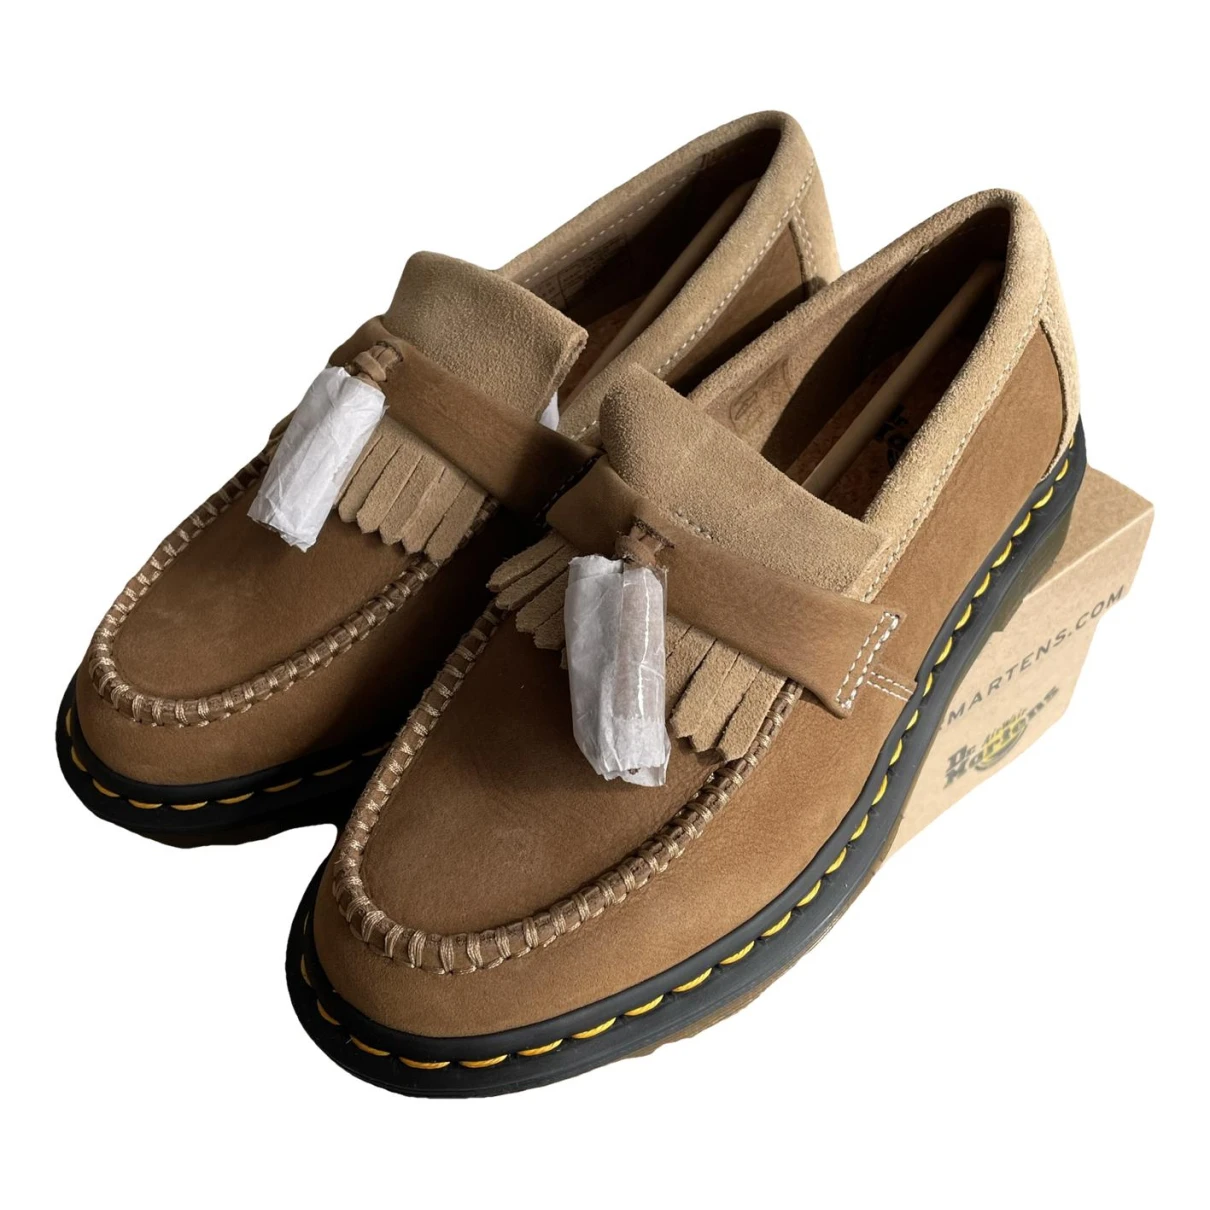 Pre-owned Dr. Martens' Adrian Leather Flats In Camel